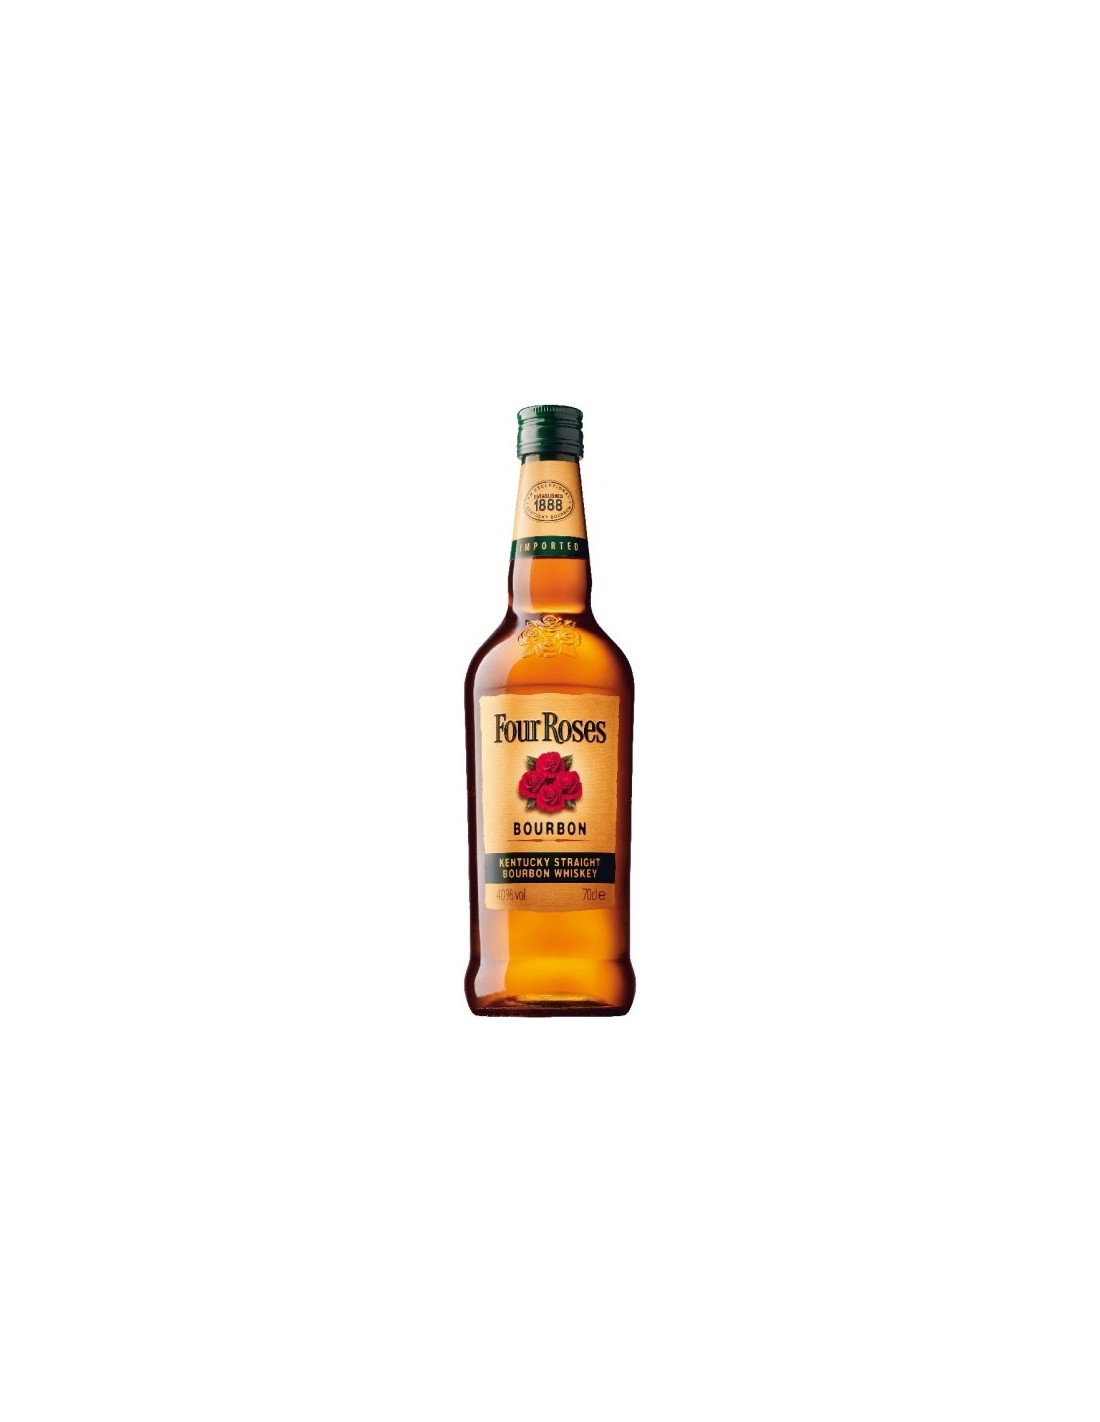 Whisky Four Roses, 0.7L, 40% alc. alcooldiscount.ro